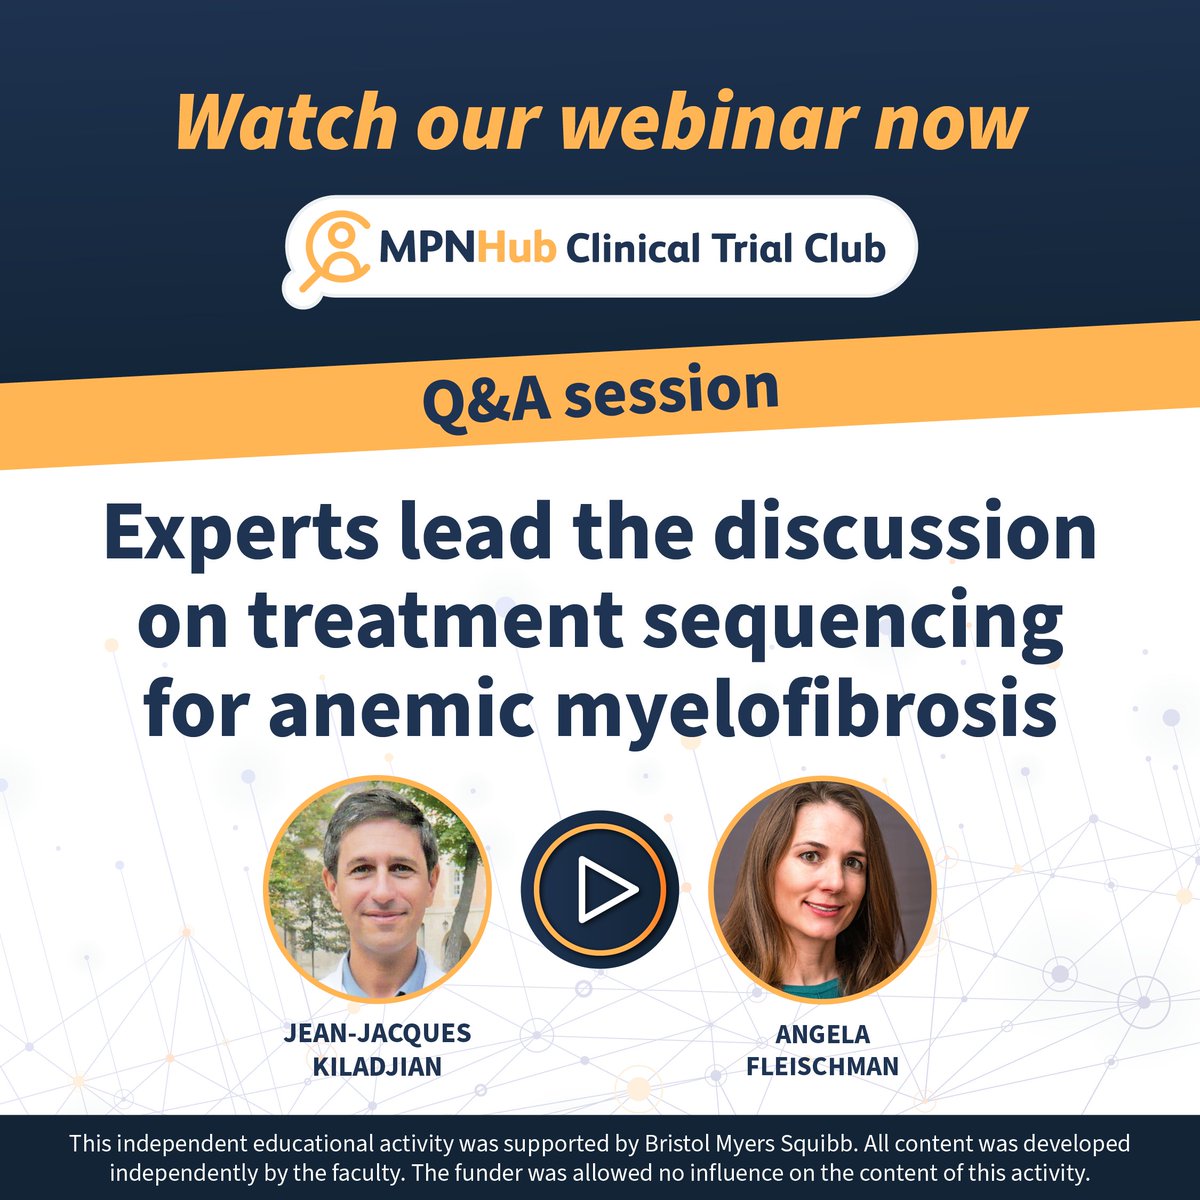 Our recent #ClinicalTrialClub ended with a dynamic Q&A session, where Angela Fleischman and @jjkiladjian answered questions from the audience on treatment sequencing for anemic #myelofibrosis. Watch here 👉 loom.ly/uB2RgWM #MPN #MPNsm #CancerAwareness @MPNlab